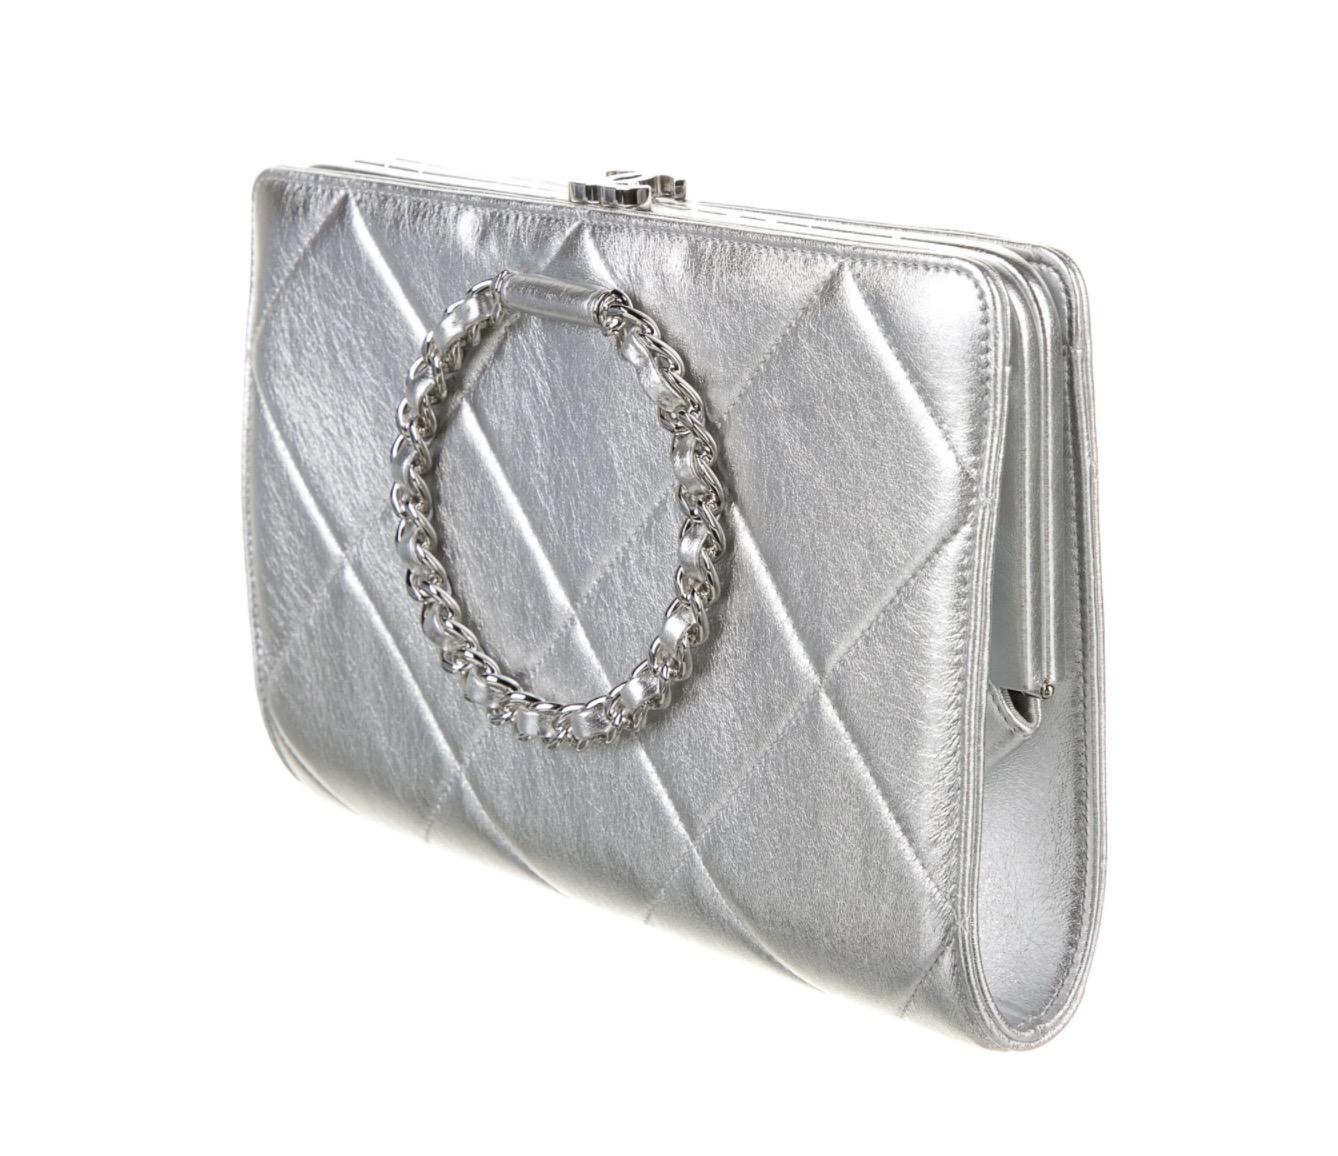 Leather
Silver tone hardware
Grosgrain lining 
Push lock closure 
Includes authenticity card and dust bag
100% authenticity guaranteed

NEWFOUND LUXURY is the premier luxury fashion dealer on the 1stDibs platform. Since 2015, NEWFOUND LUXURY has